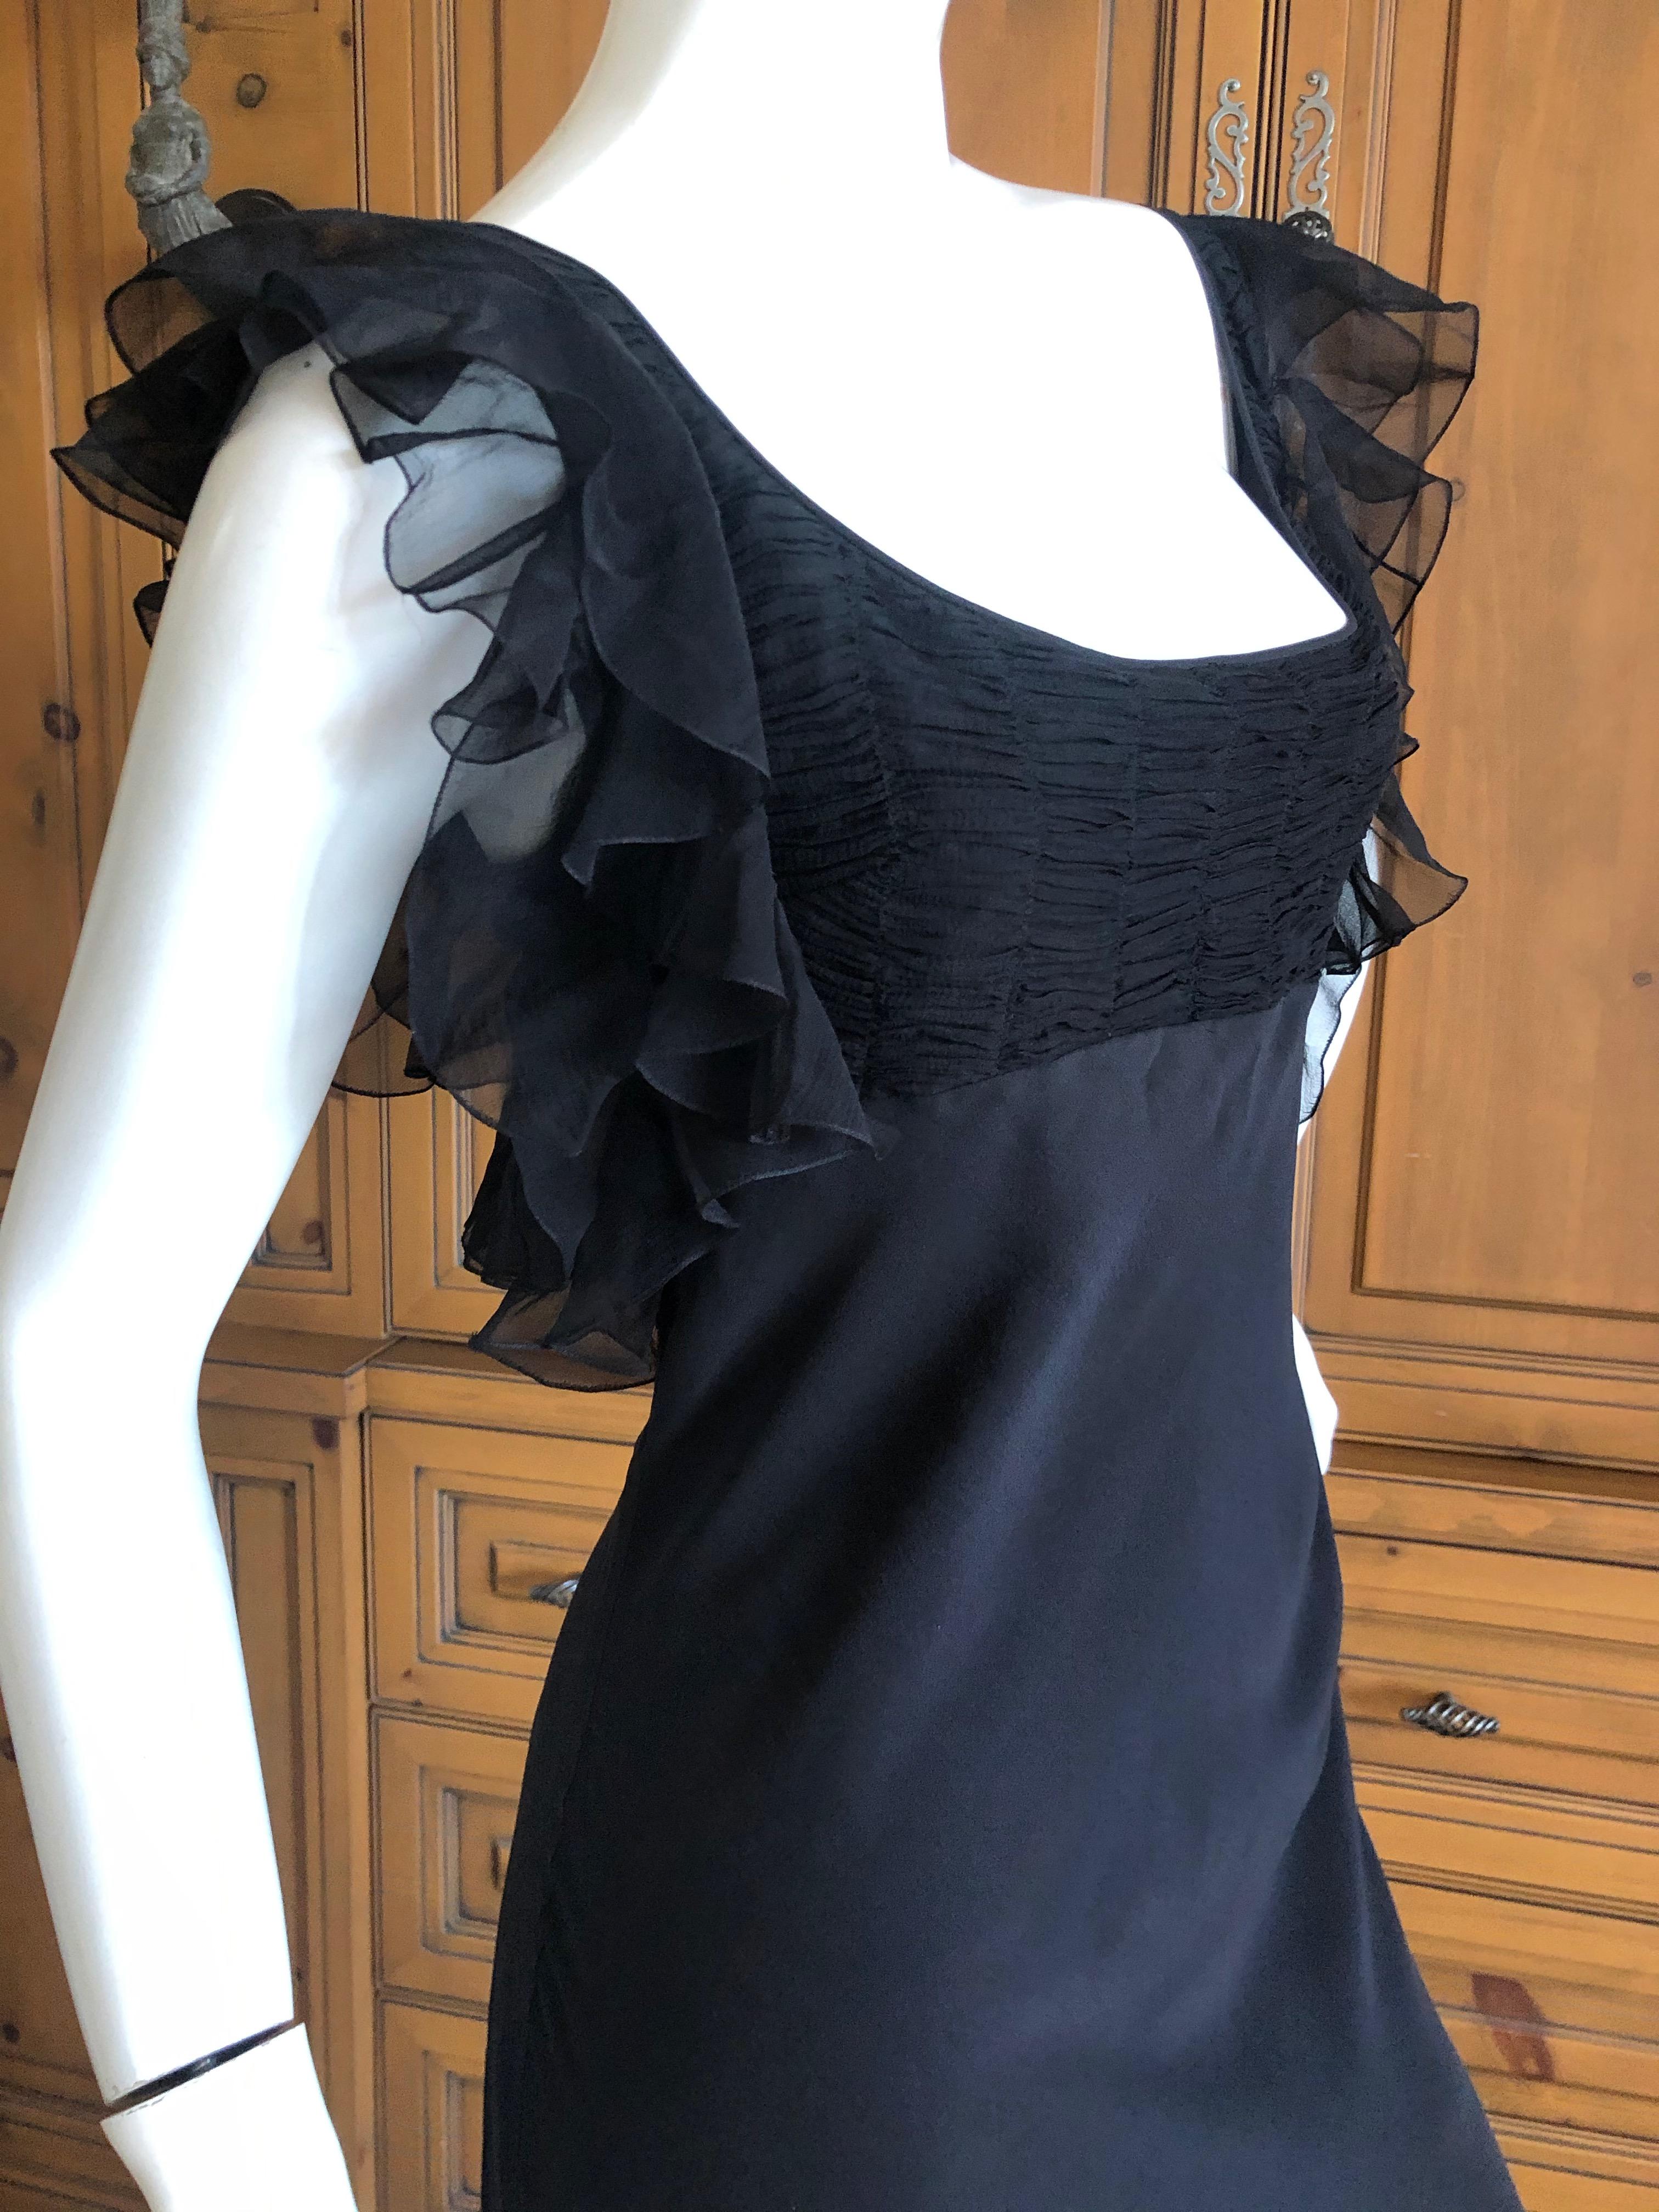 John Galliano Vintage Black Bias Cut Empire Style Evening Dress with Ruffles For Sale 2